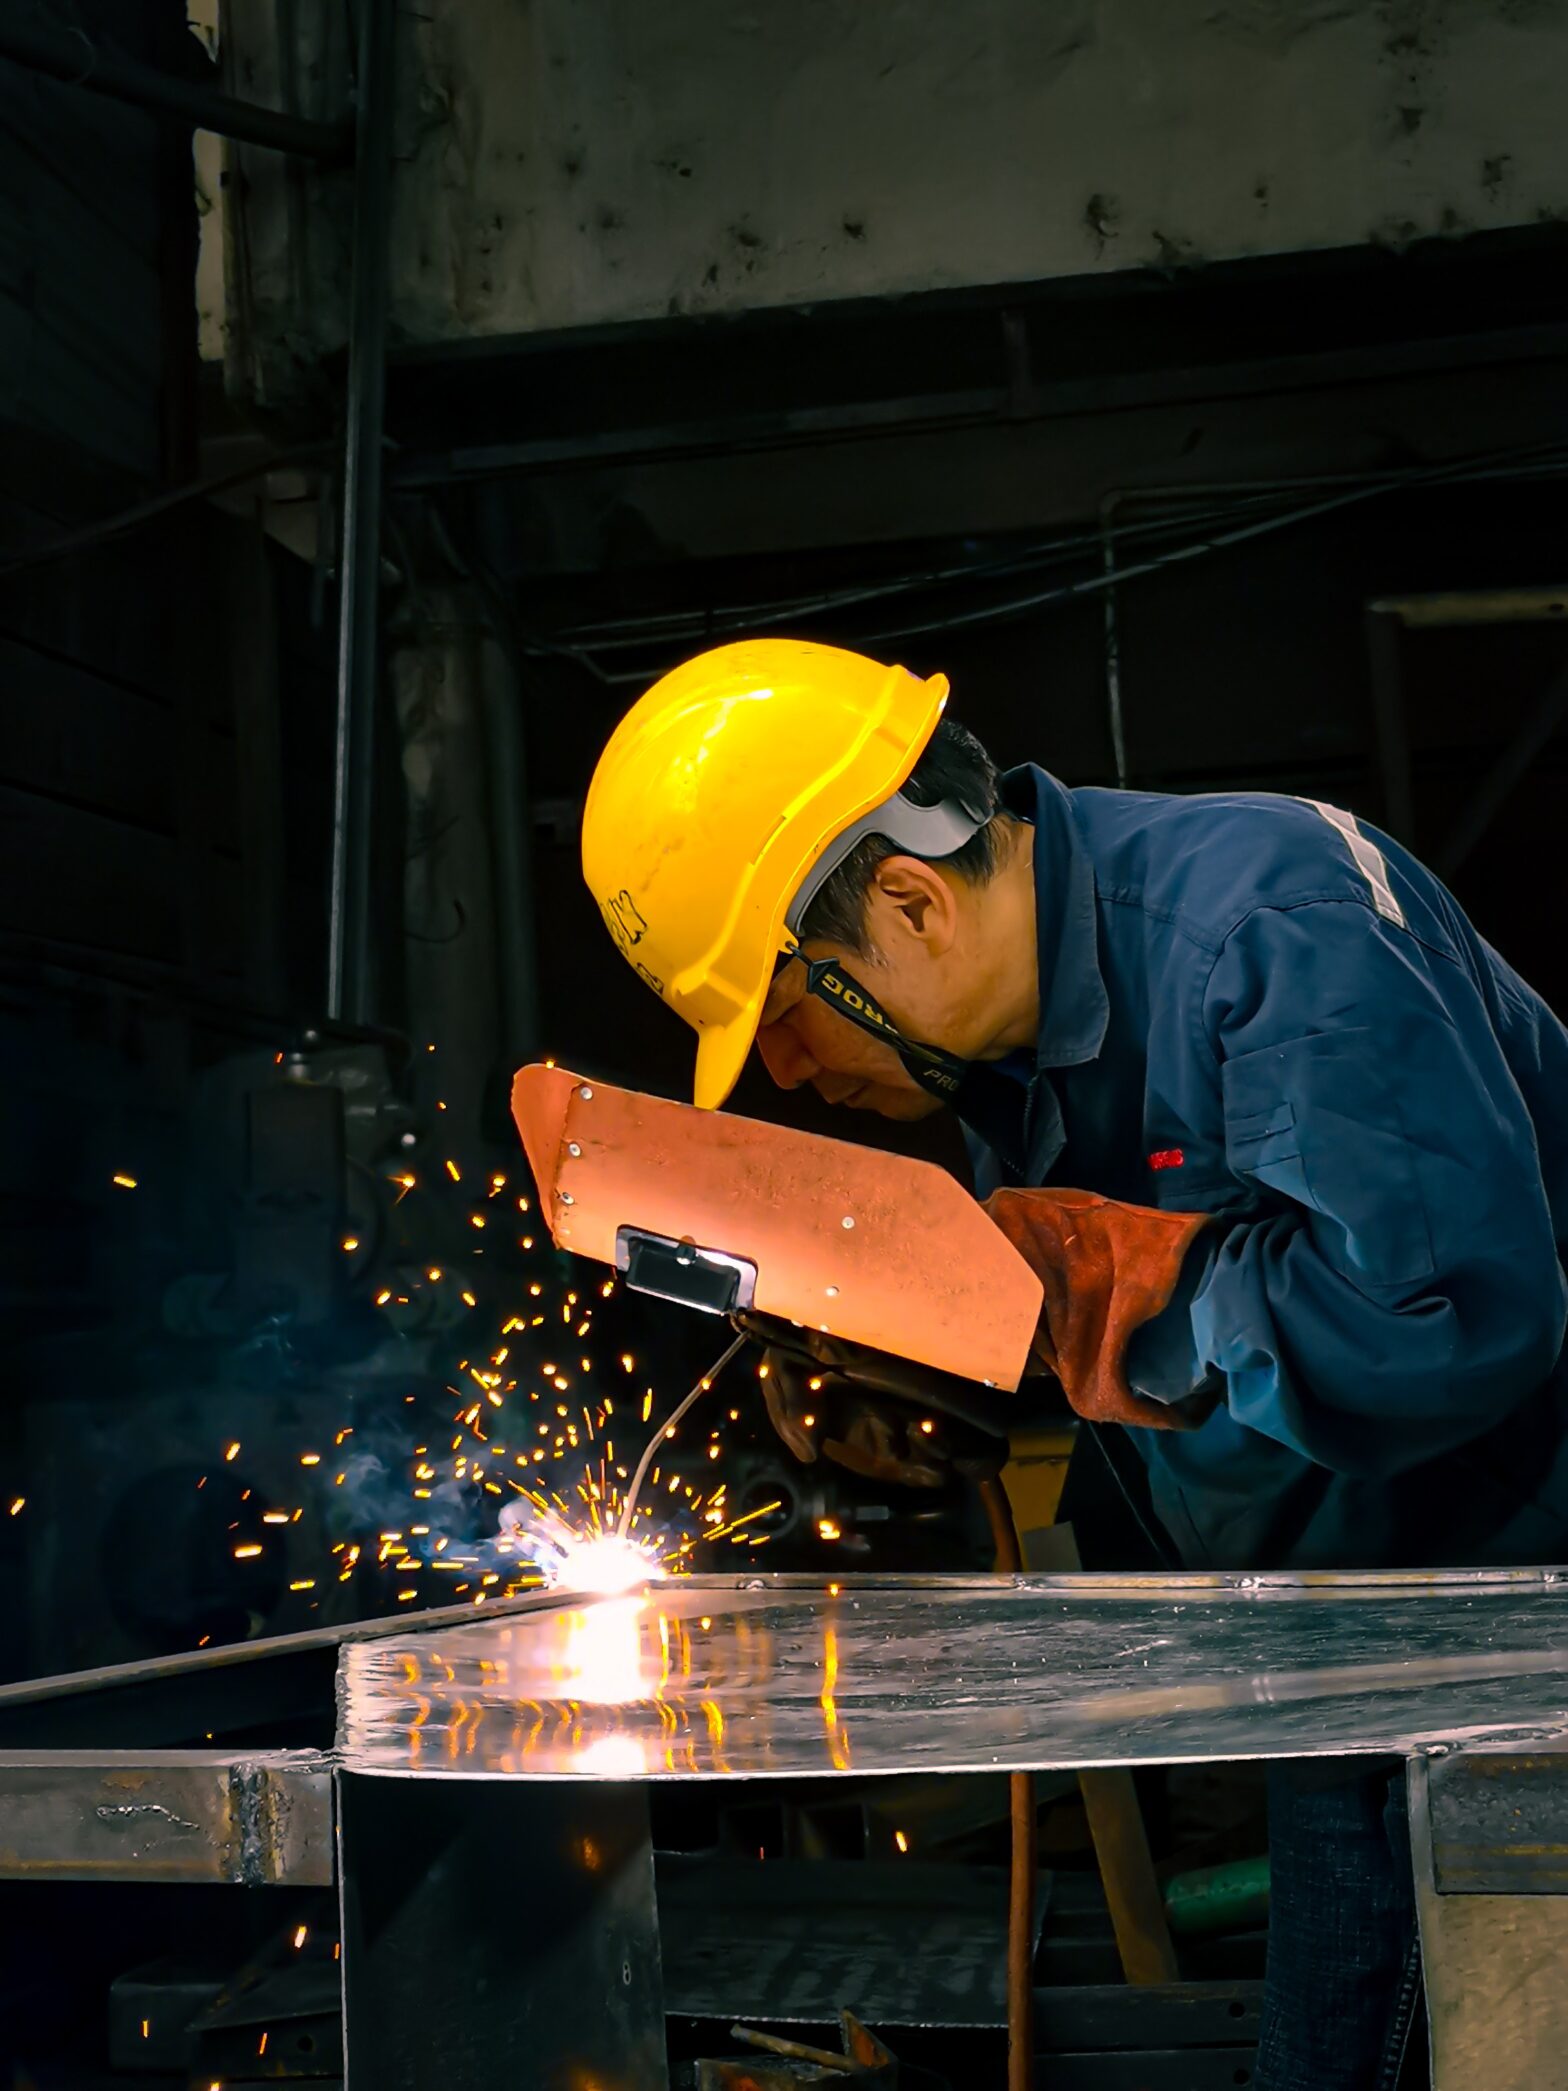 An image of a worker in a yellow hard hat, shielding his face whilst welding